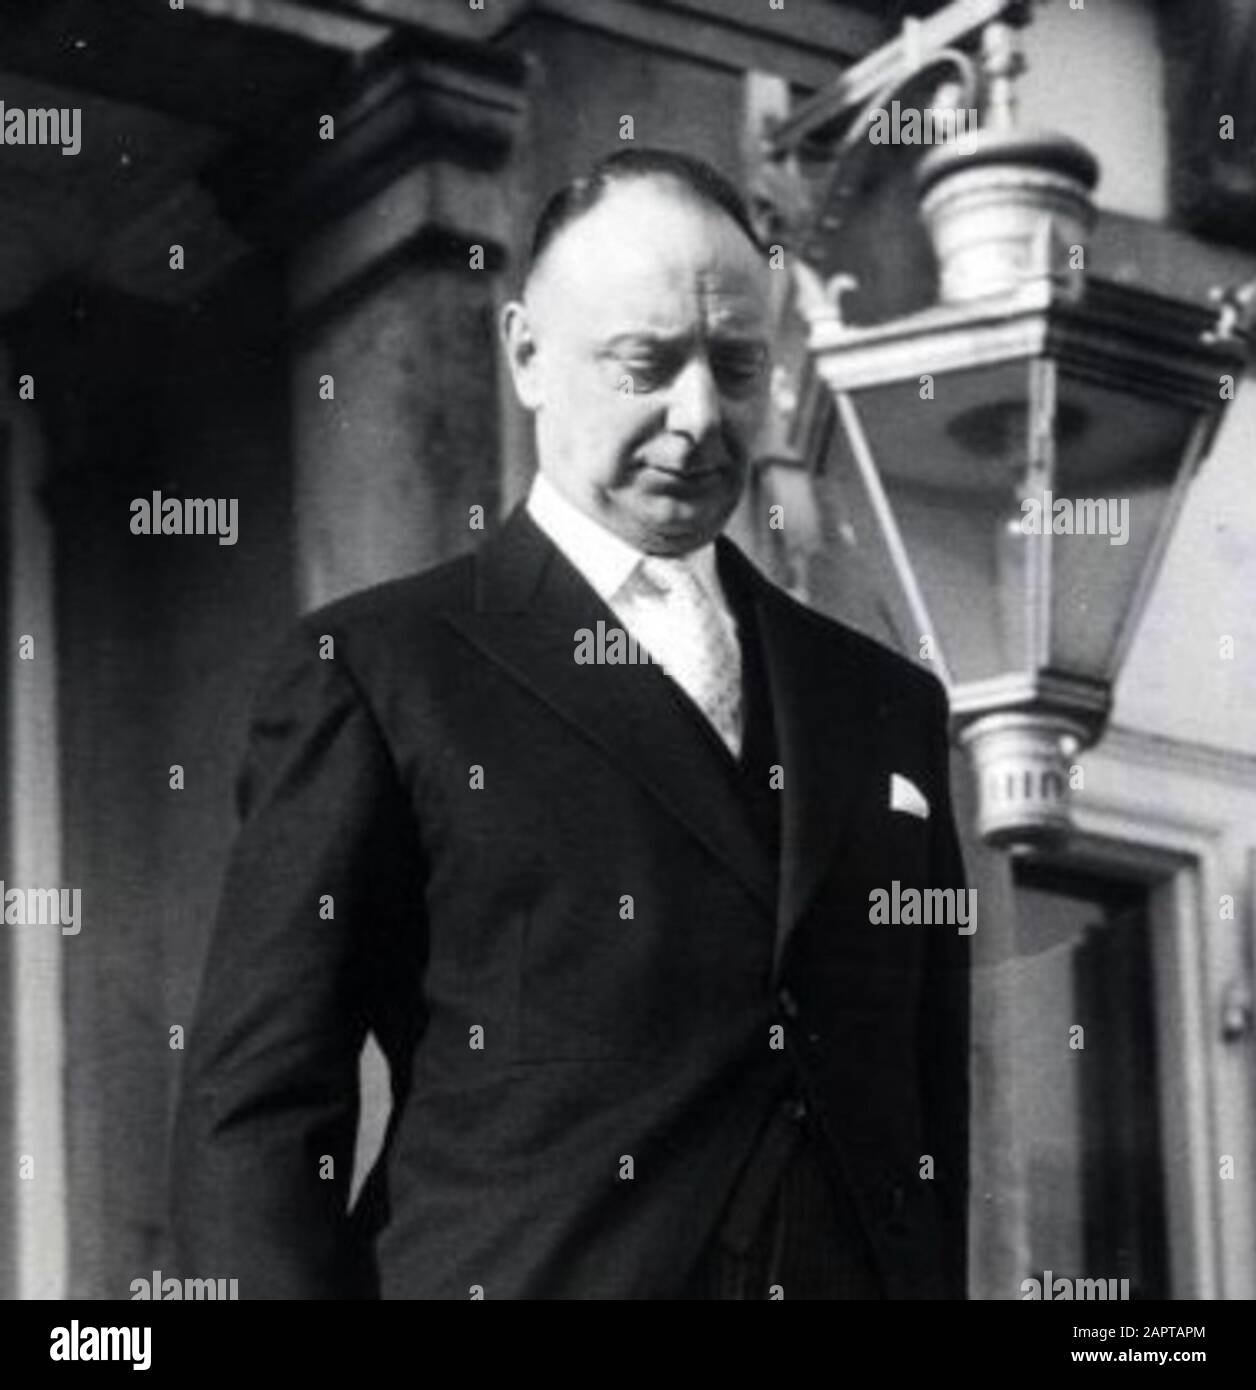 Helders, G.P. (CHU). Reception at the Soestdijk Palace of the new Minister for Foreign Affairs, Mr. G.Ph. Helders, for taking the oath. Photo: Helders when leaving the palace. Netherlands, Soest/Baarn, 17 February 1957.; Stock Photo